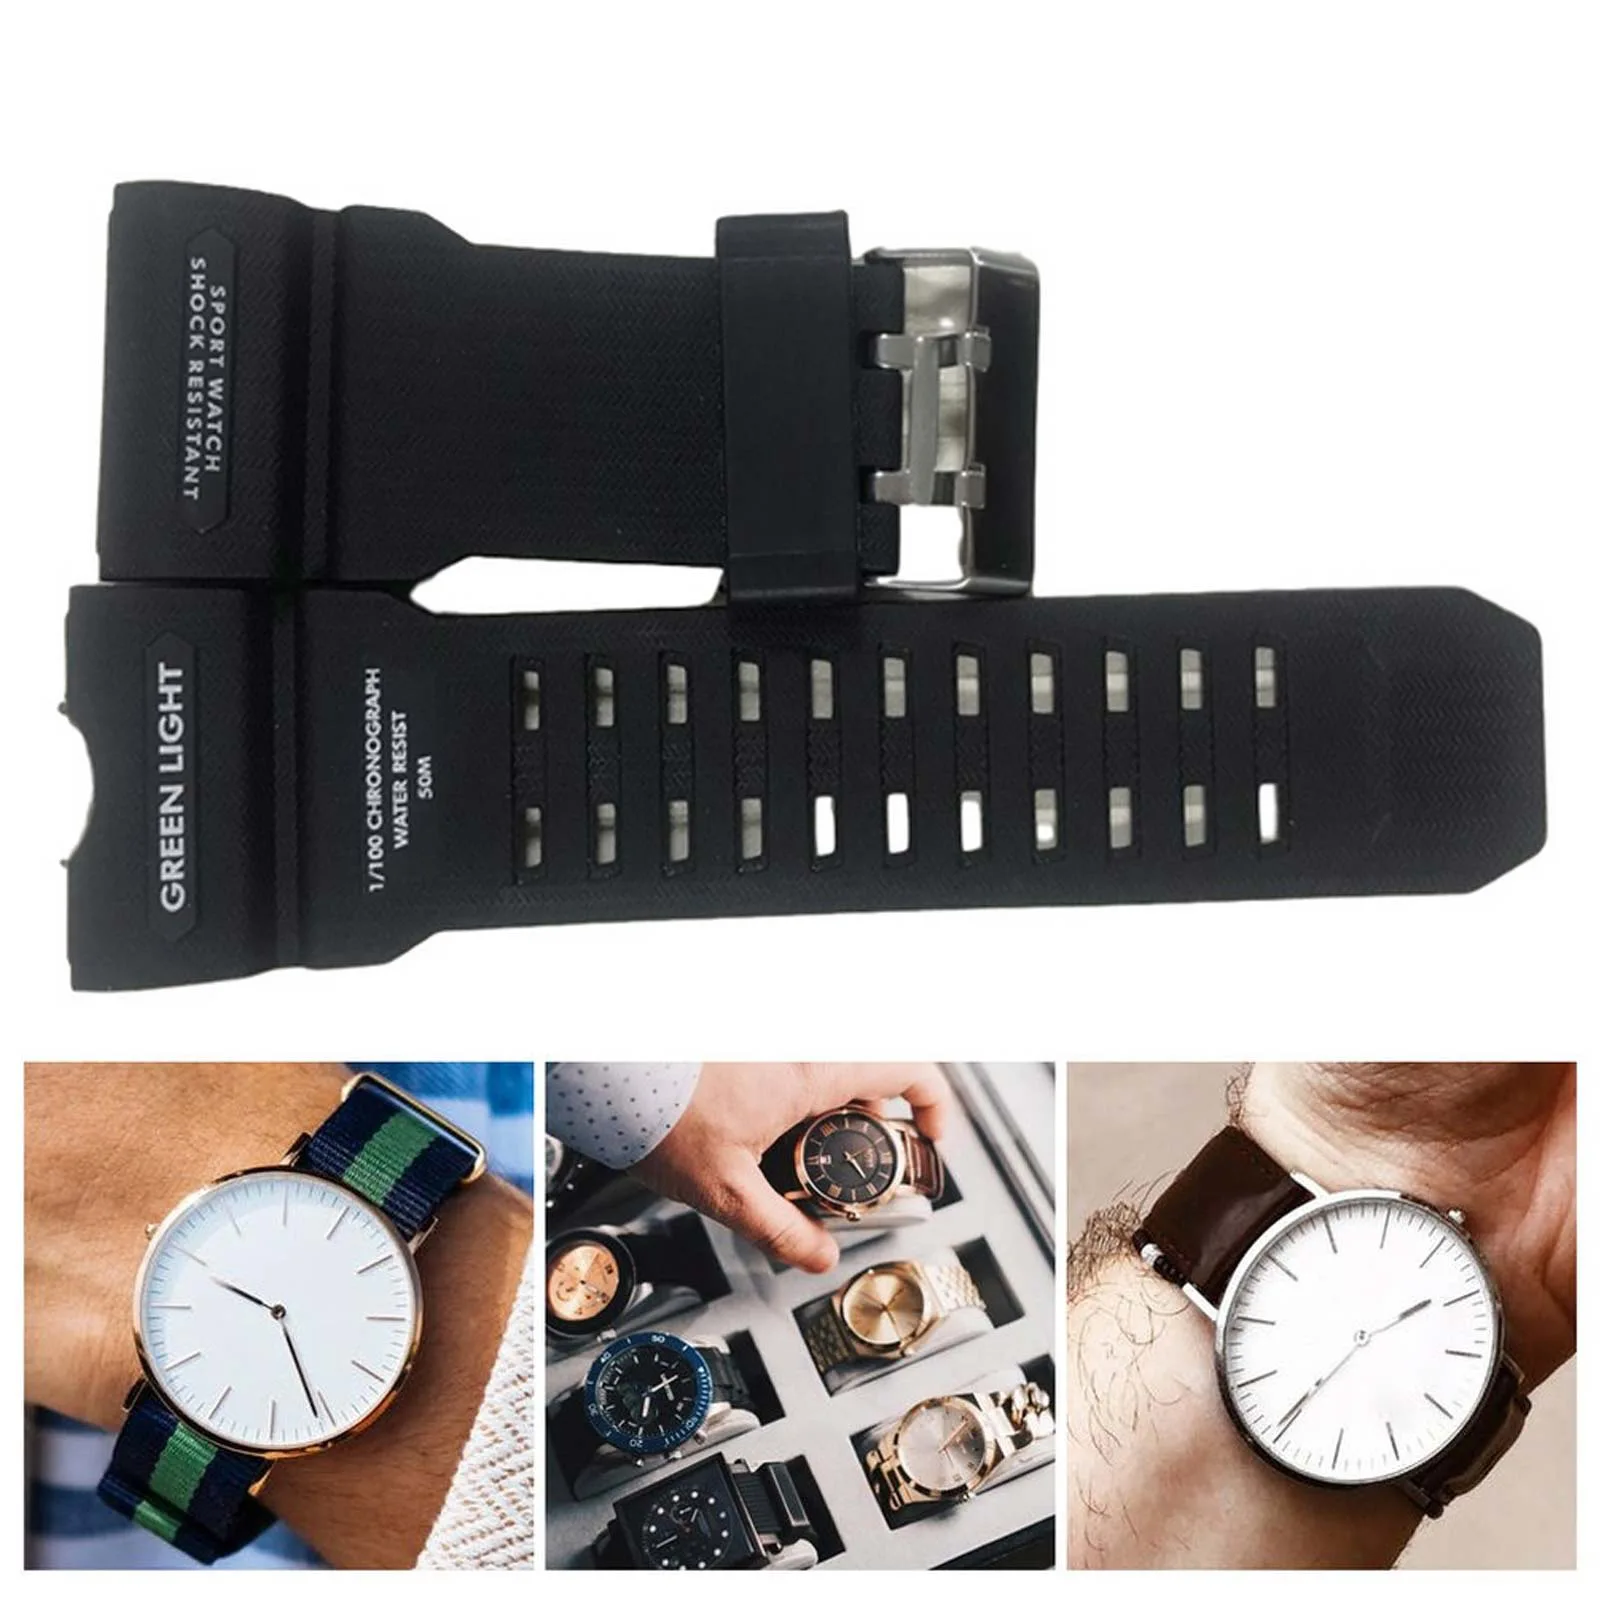 Watch Strap for SKMEI Strap 1016 Adjustable Plastic Replacement Watch Strap Sports Watch Accessories